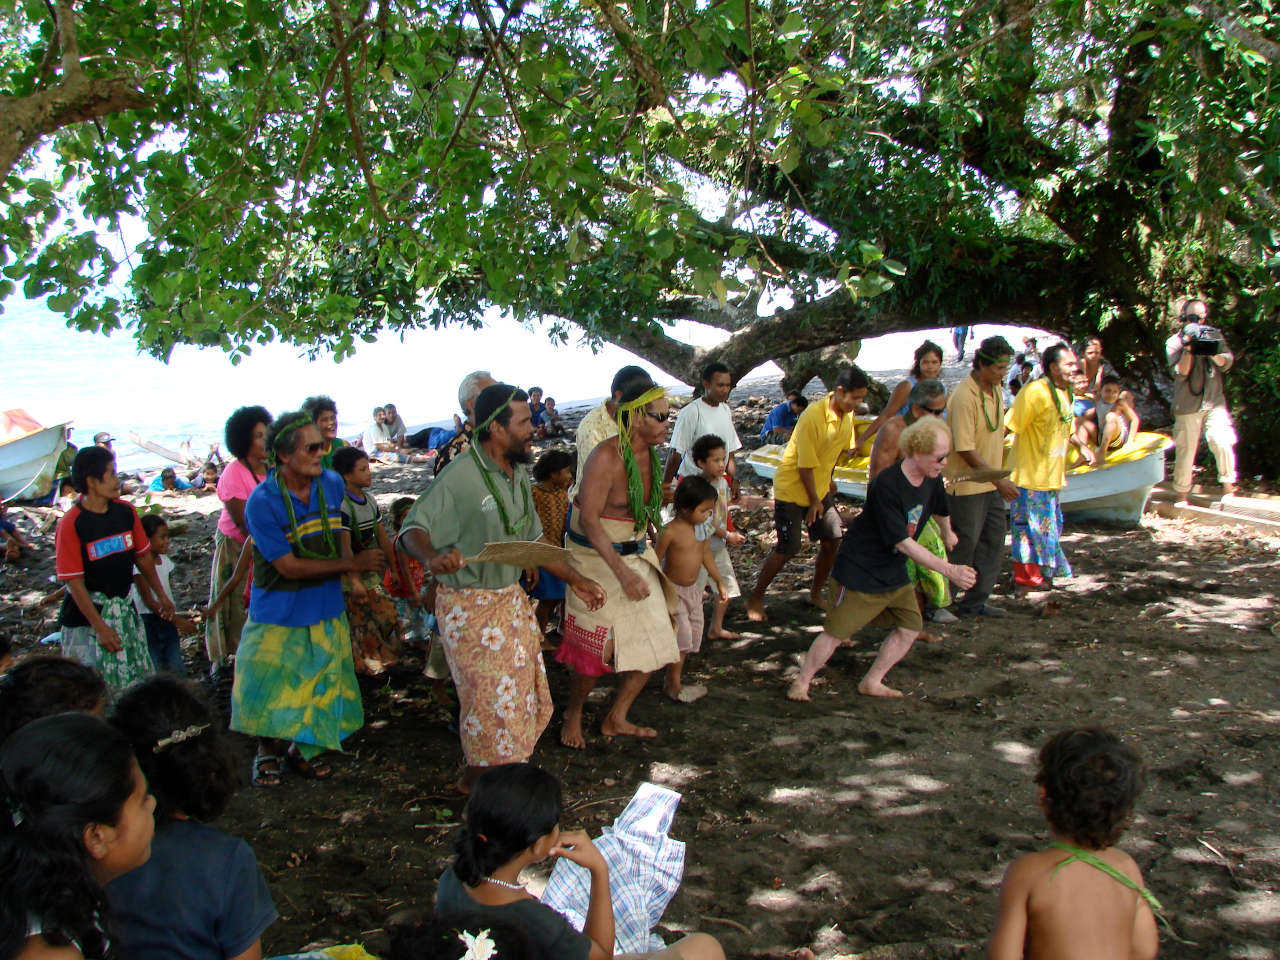 A large group of people dancing under trees on the beach